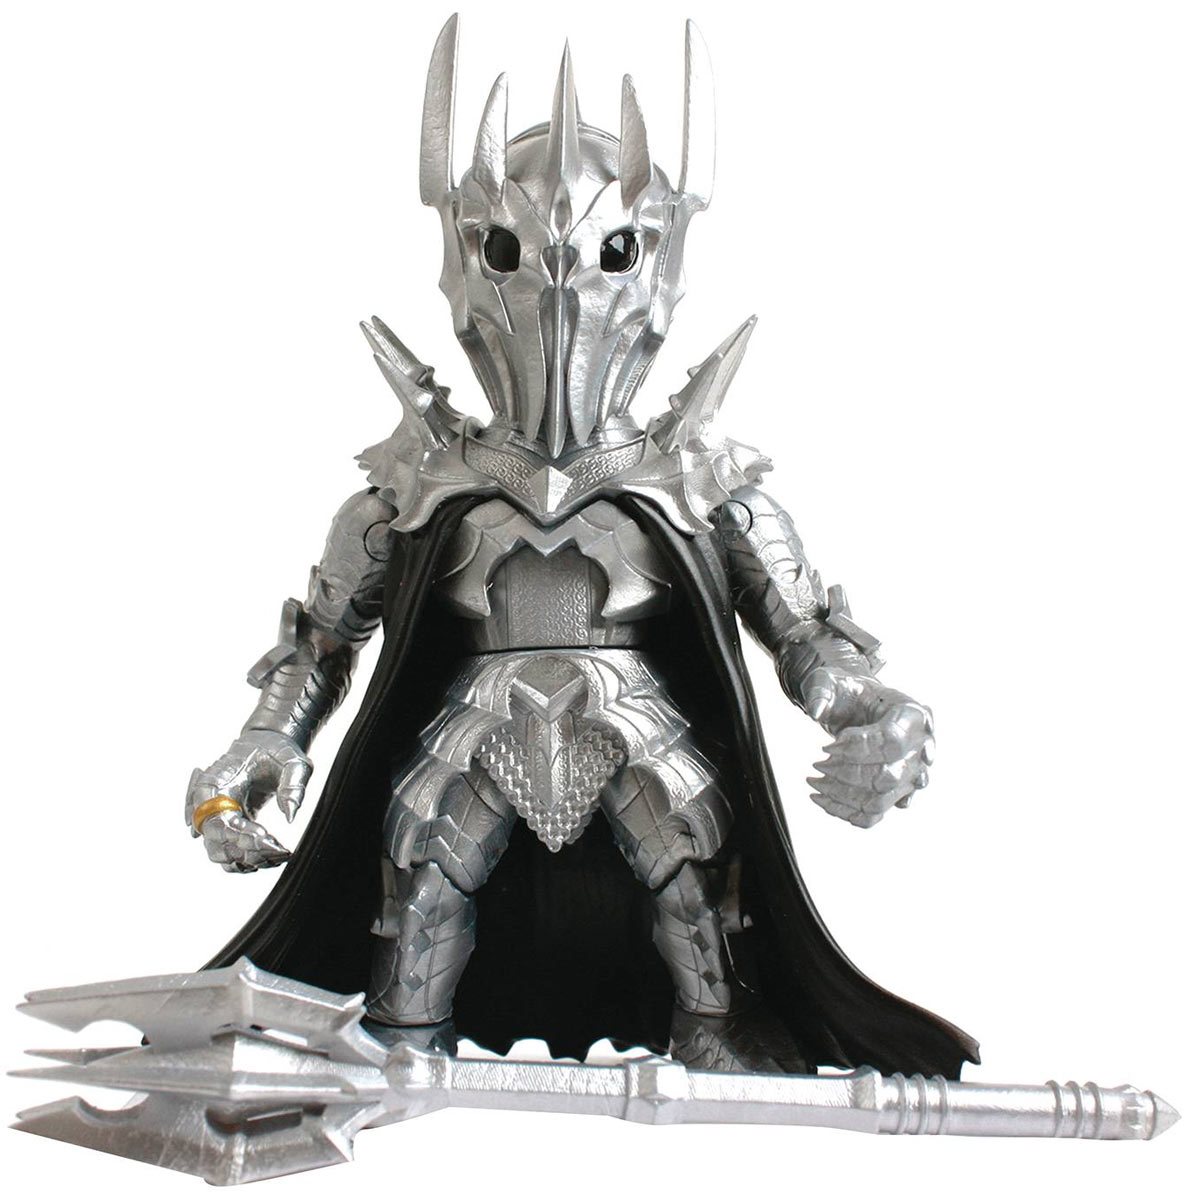 The Lord of the Rings BendyFigs Sauron Figure